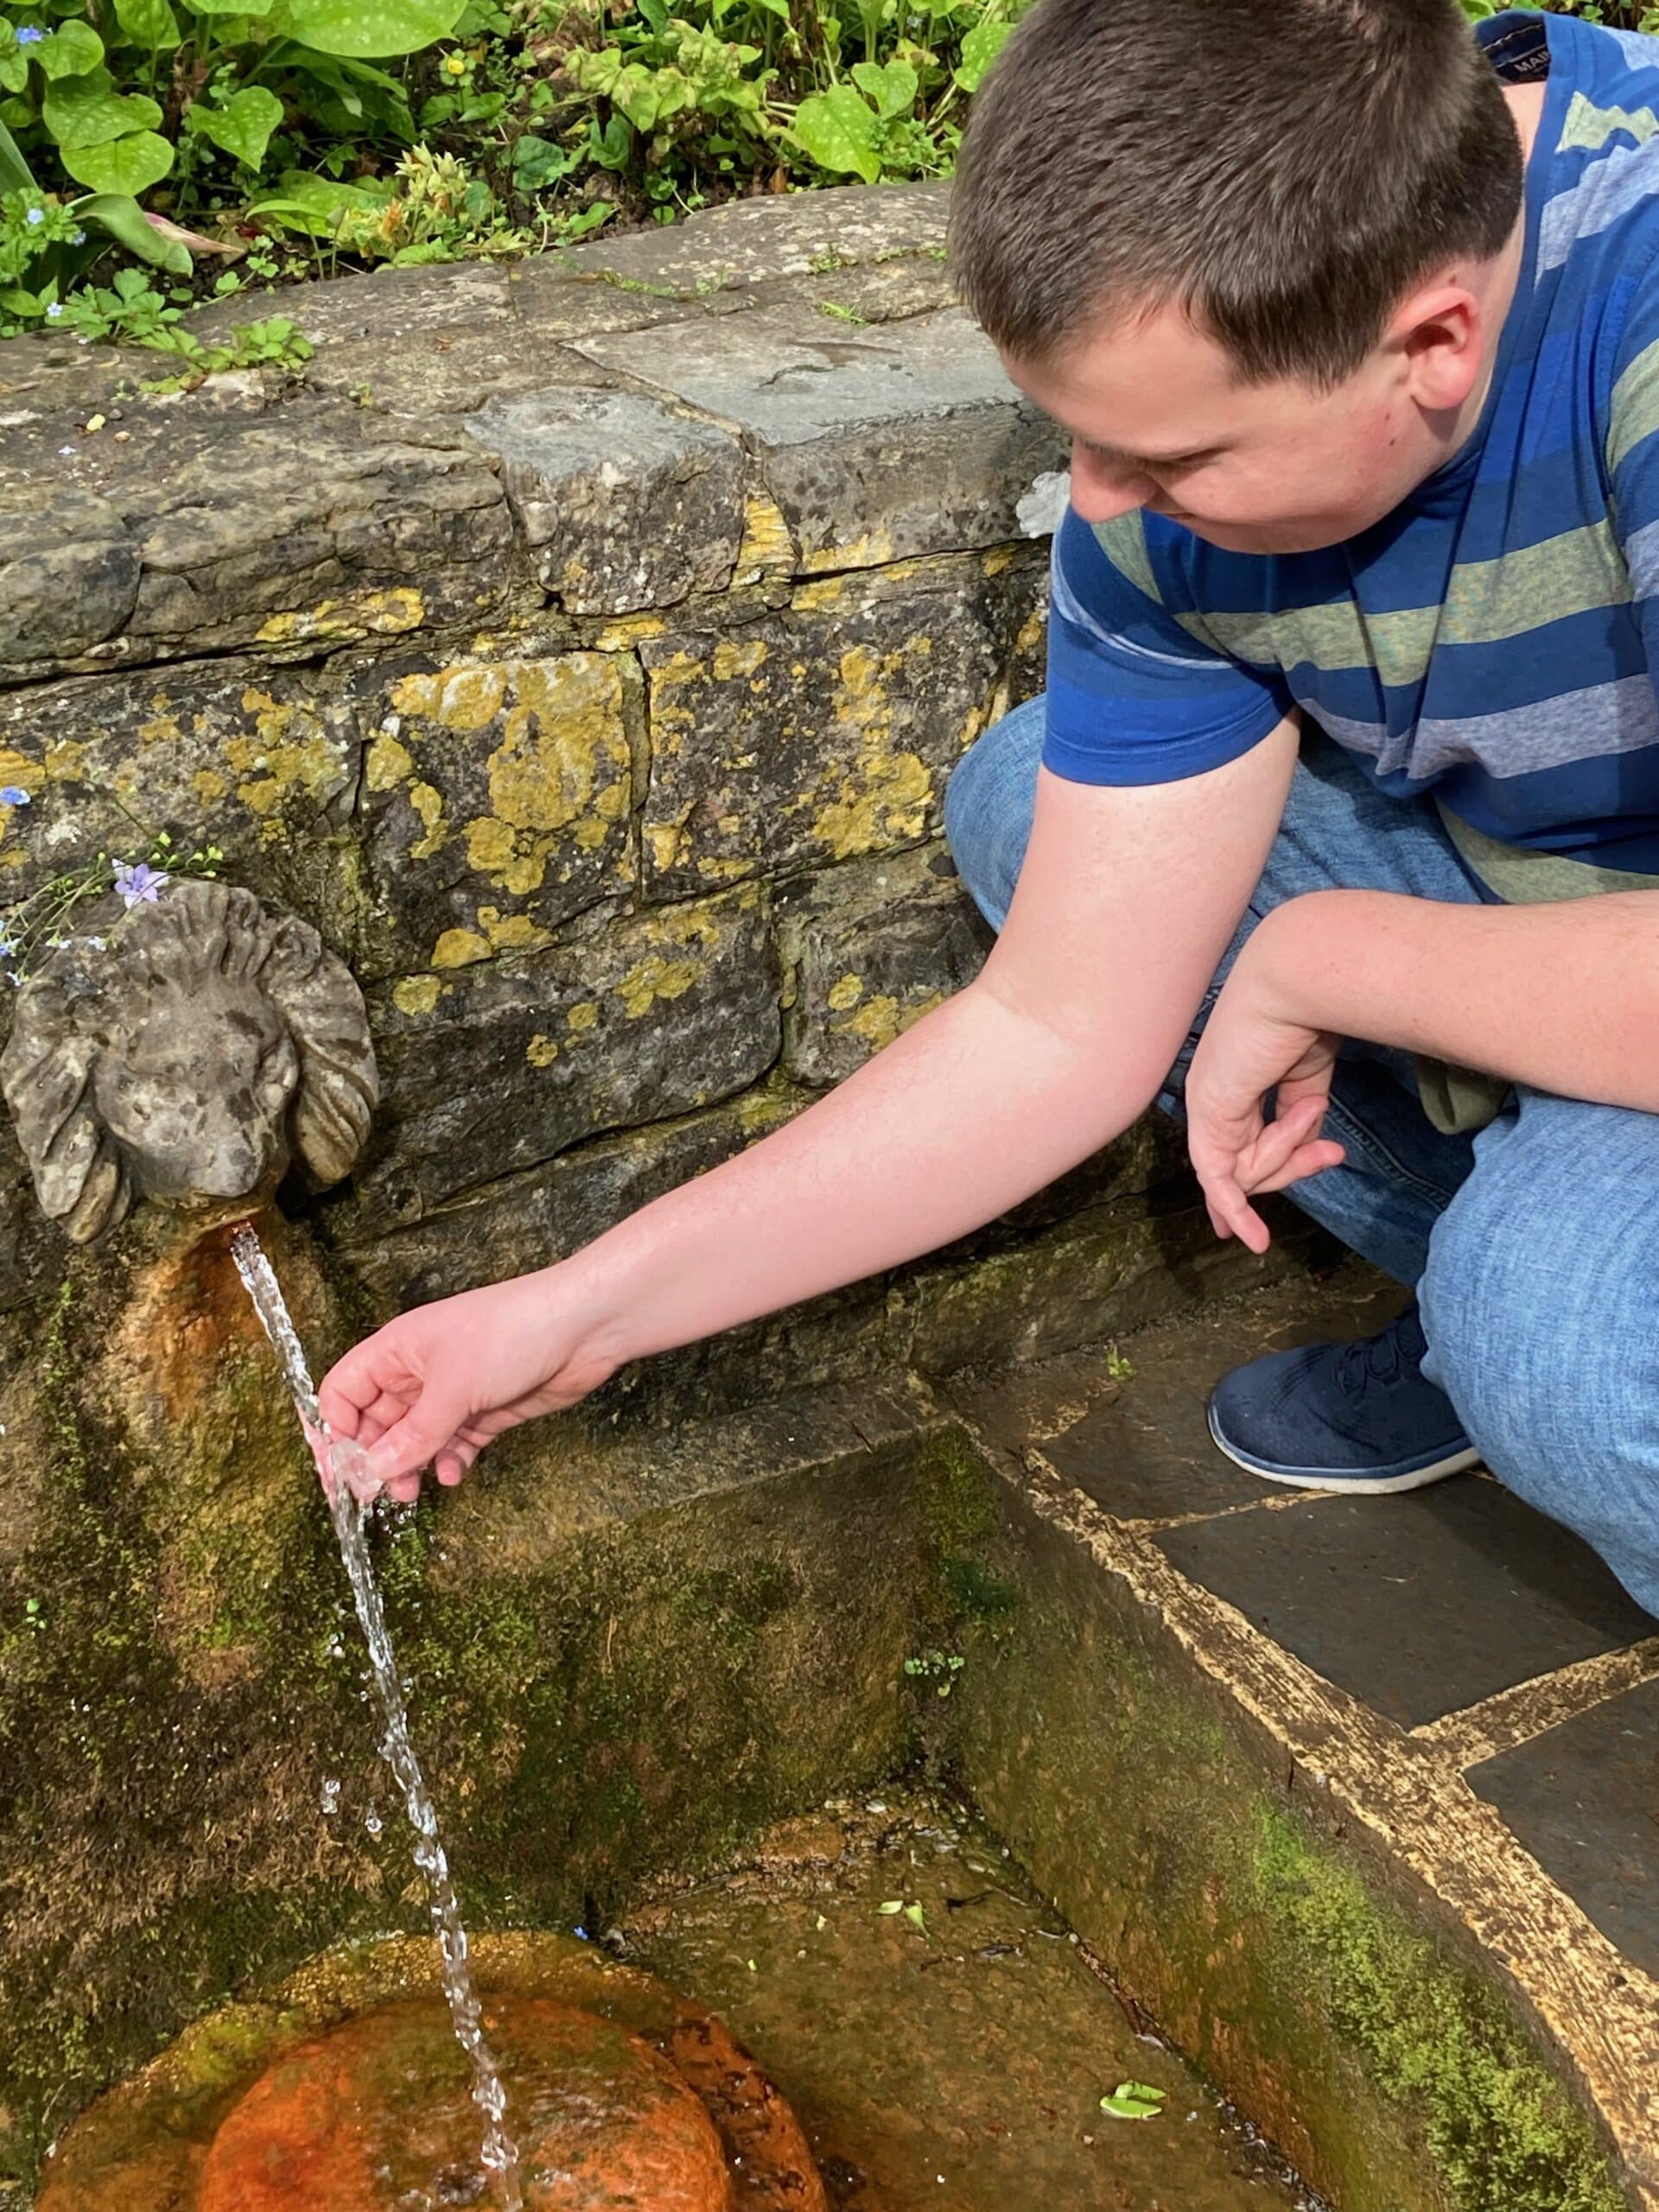 Jonathon cleansing crystal within Chalice Well in Glastonbury